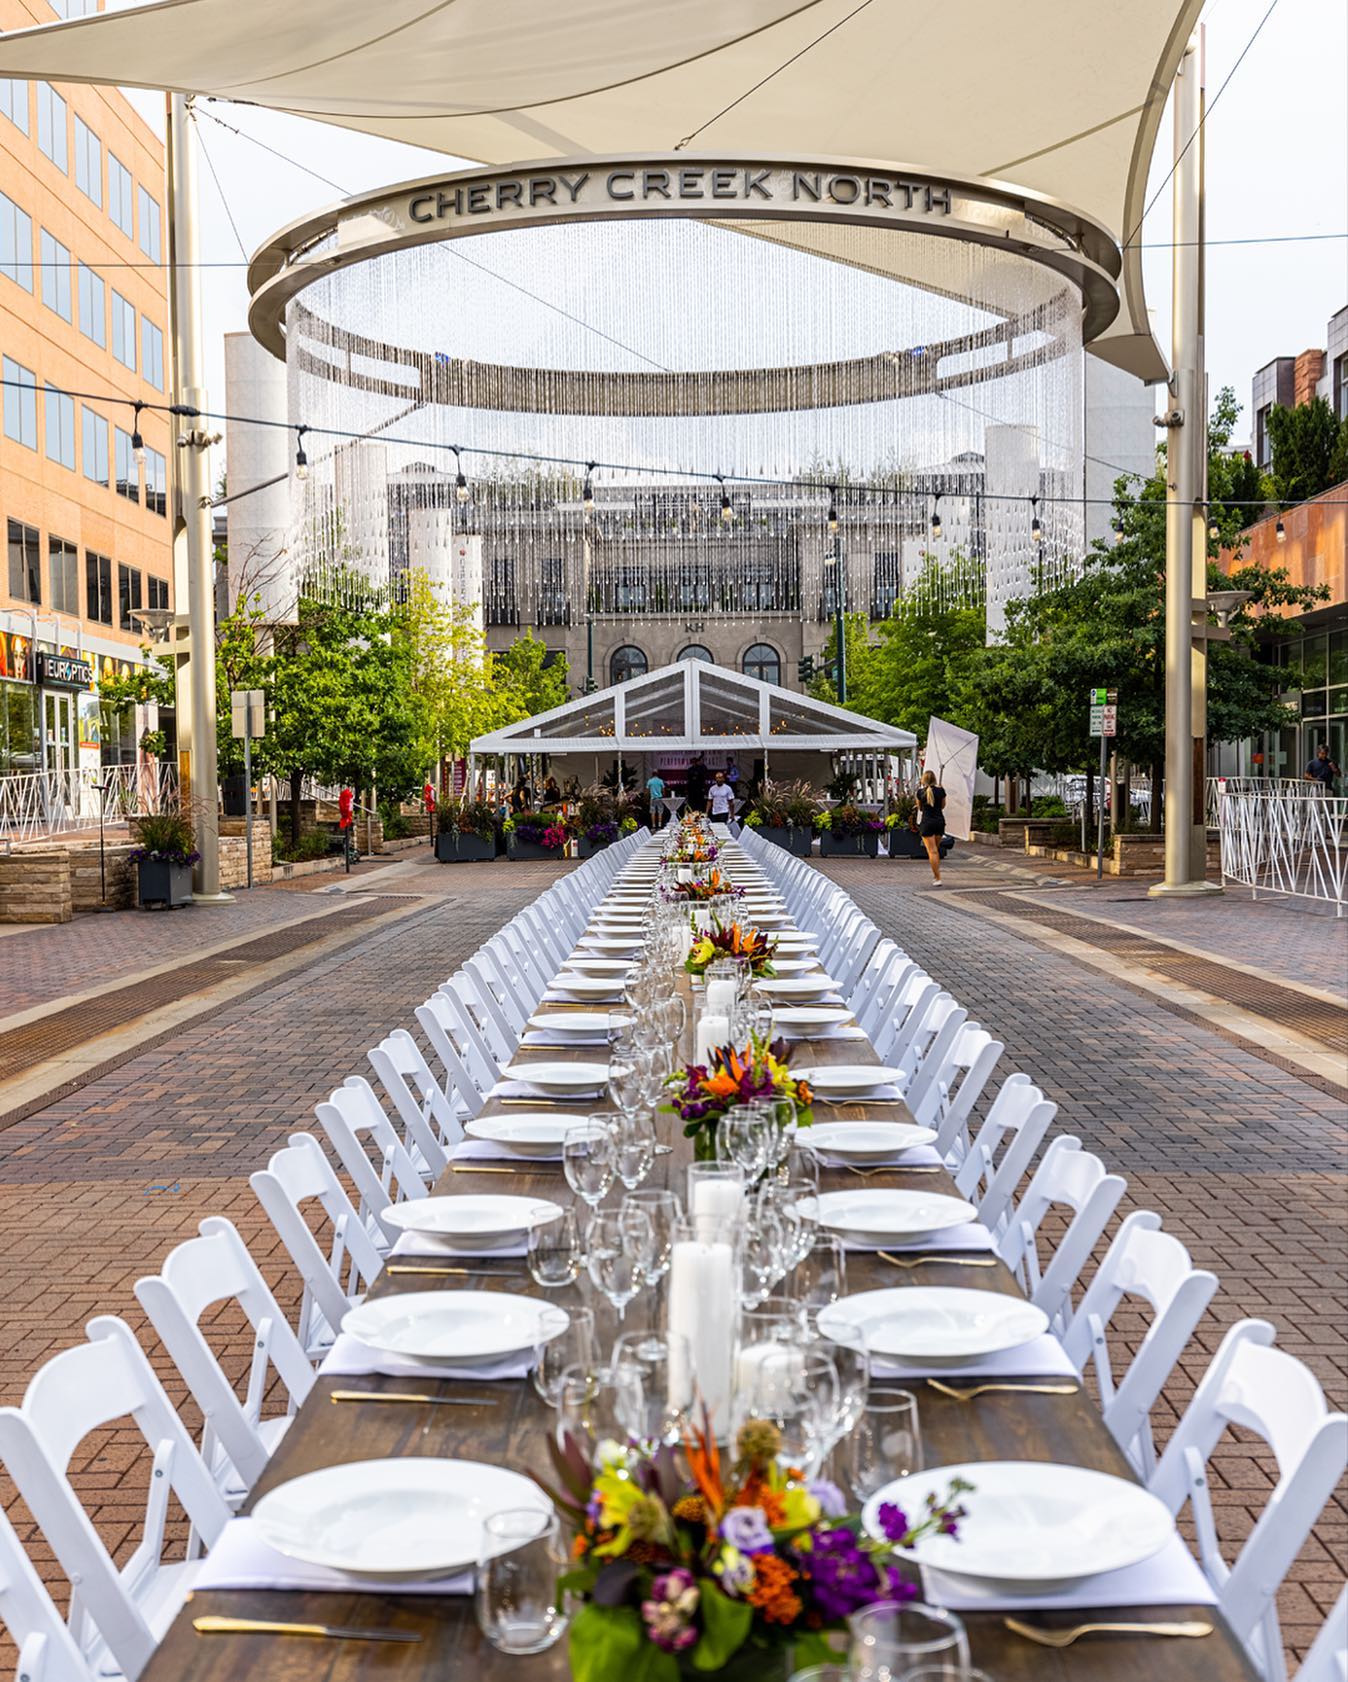 Get a taste of Denver's food scene and experience the distinct flavor of @cherrycreeknorth during Cherry Creek Al Fresco - A Food & Wine Event ✨ August 17 – 20 ✨ See link in bio for tickets!
.
.
.
#cherrycreeknorth #denverevents #denverfoodscene #denverfoodie #5280eats #denvereats